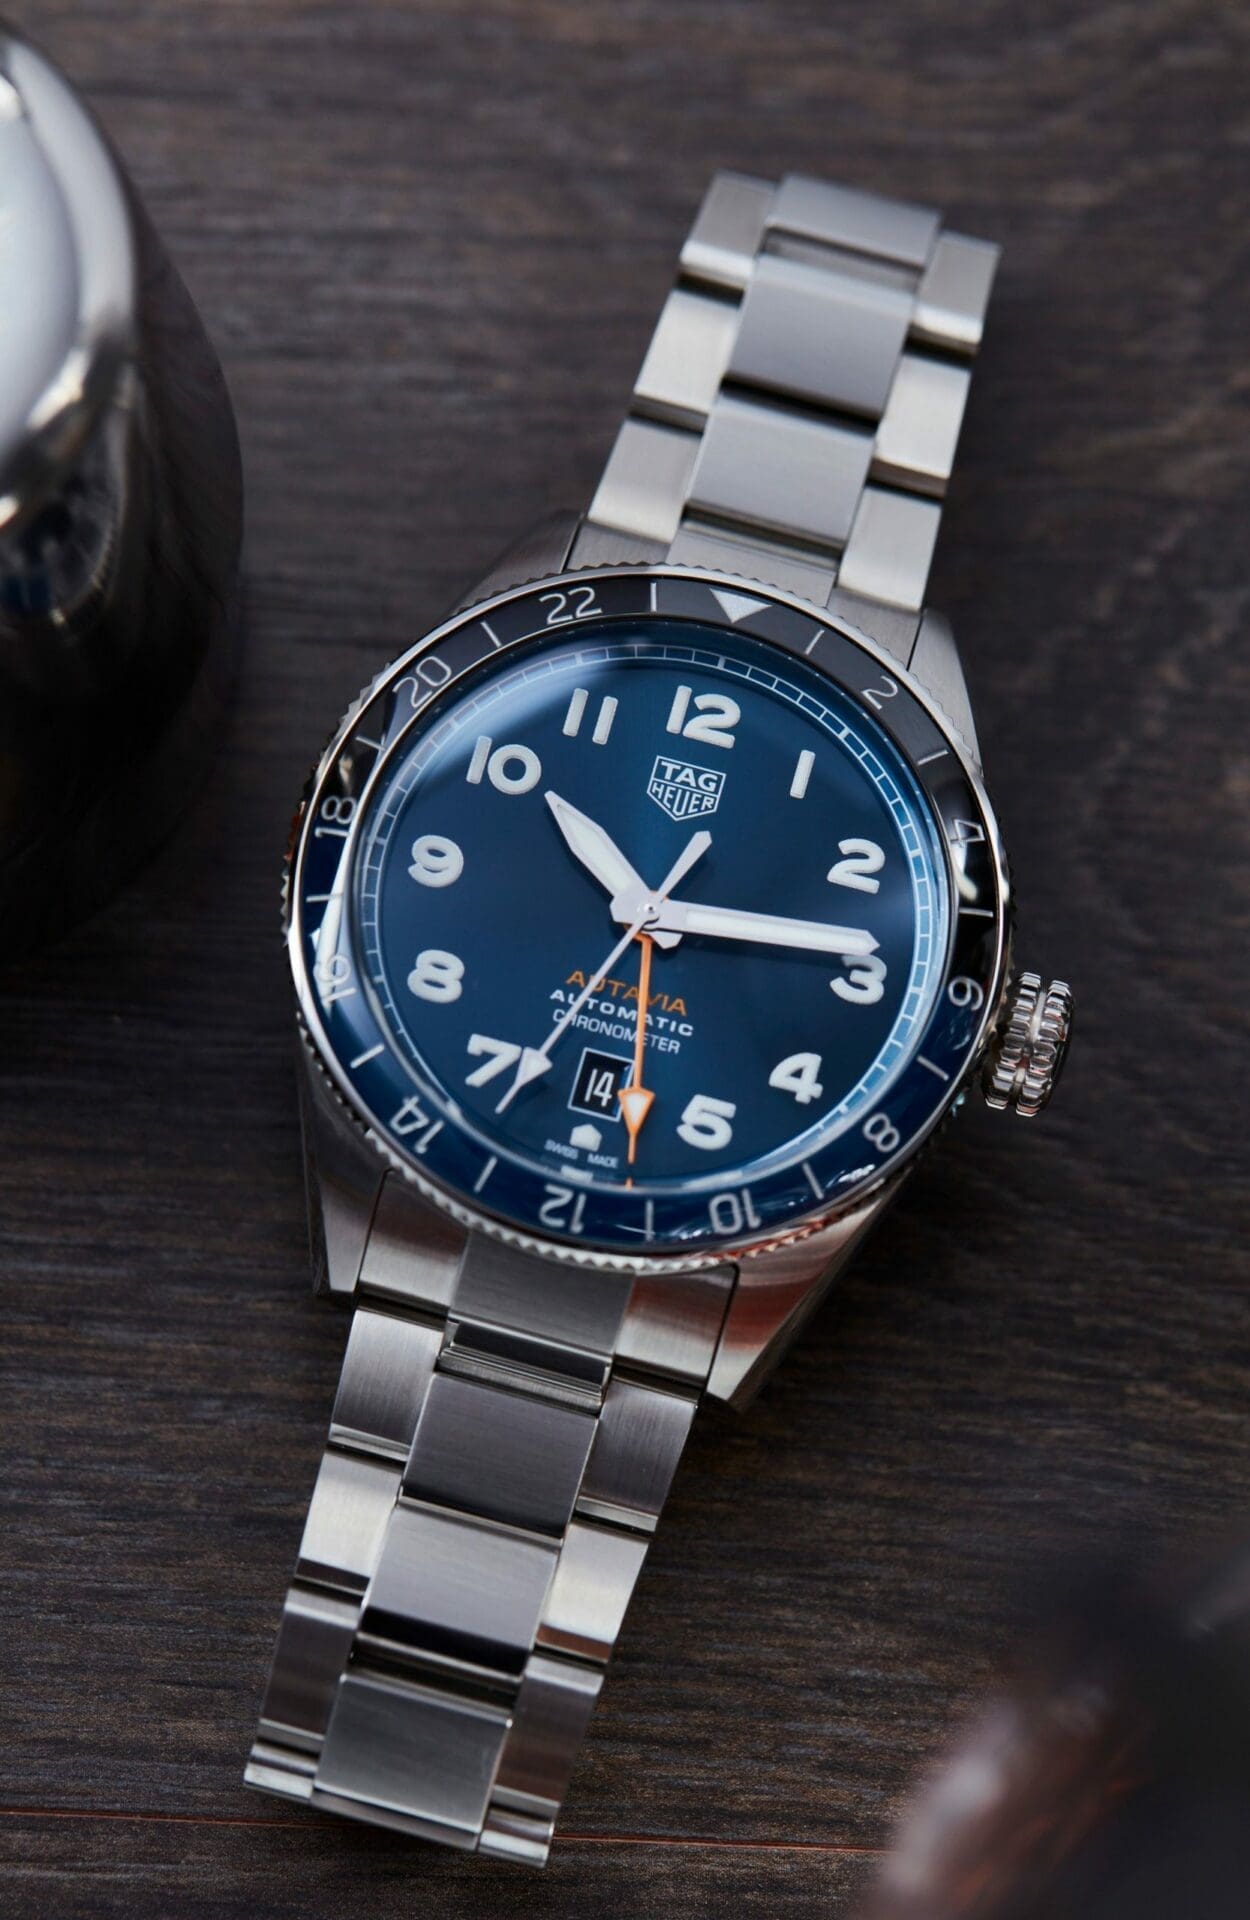 HANDS ON: Clean and serene, the new TAG Heuer Autavia COSC GMT carries no excess baggage